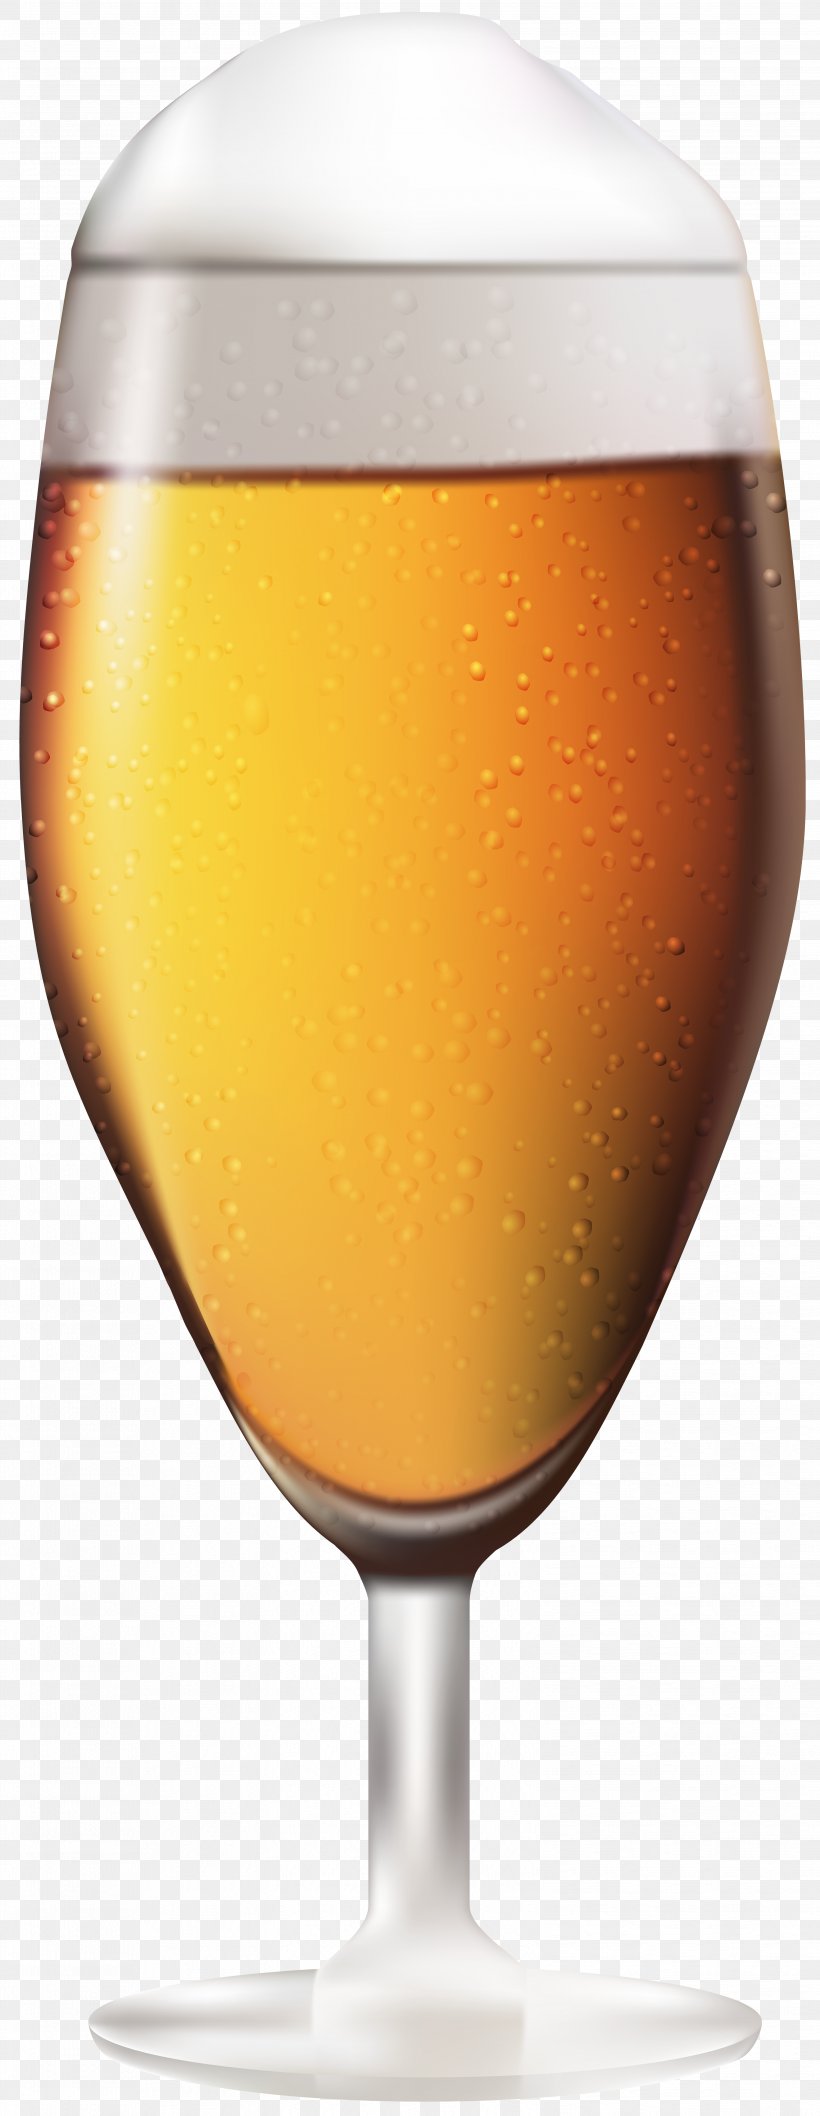 Beer Glasses Wine Glass Imperial Pint Pint Glass, PNG, 3099x8000px, Beer, Alcoholic Beverage, Beer Cocktail, Beer Glass, Beer Glasses Download Free